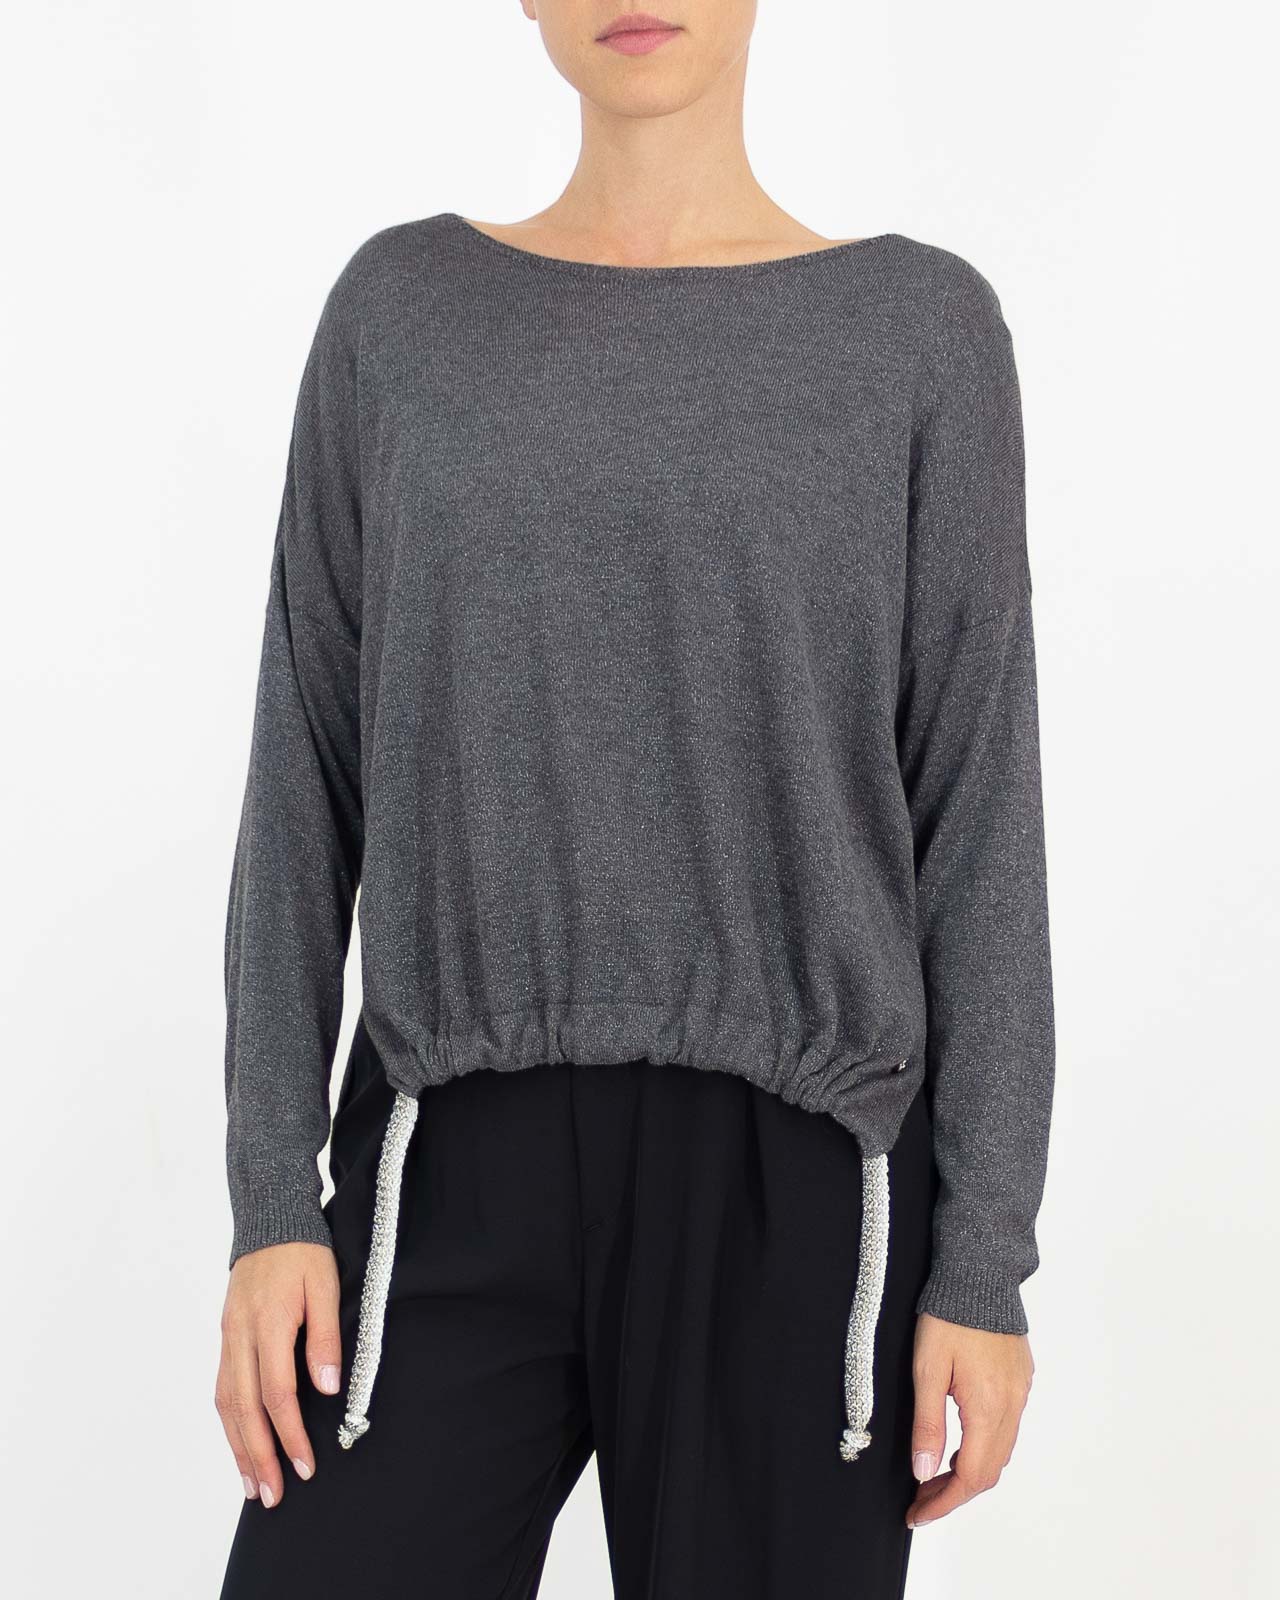 Lurex sweater with laces